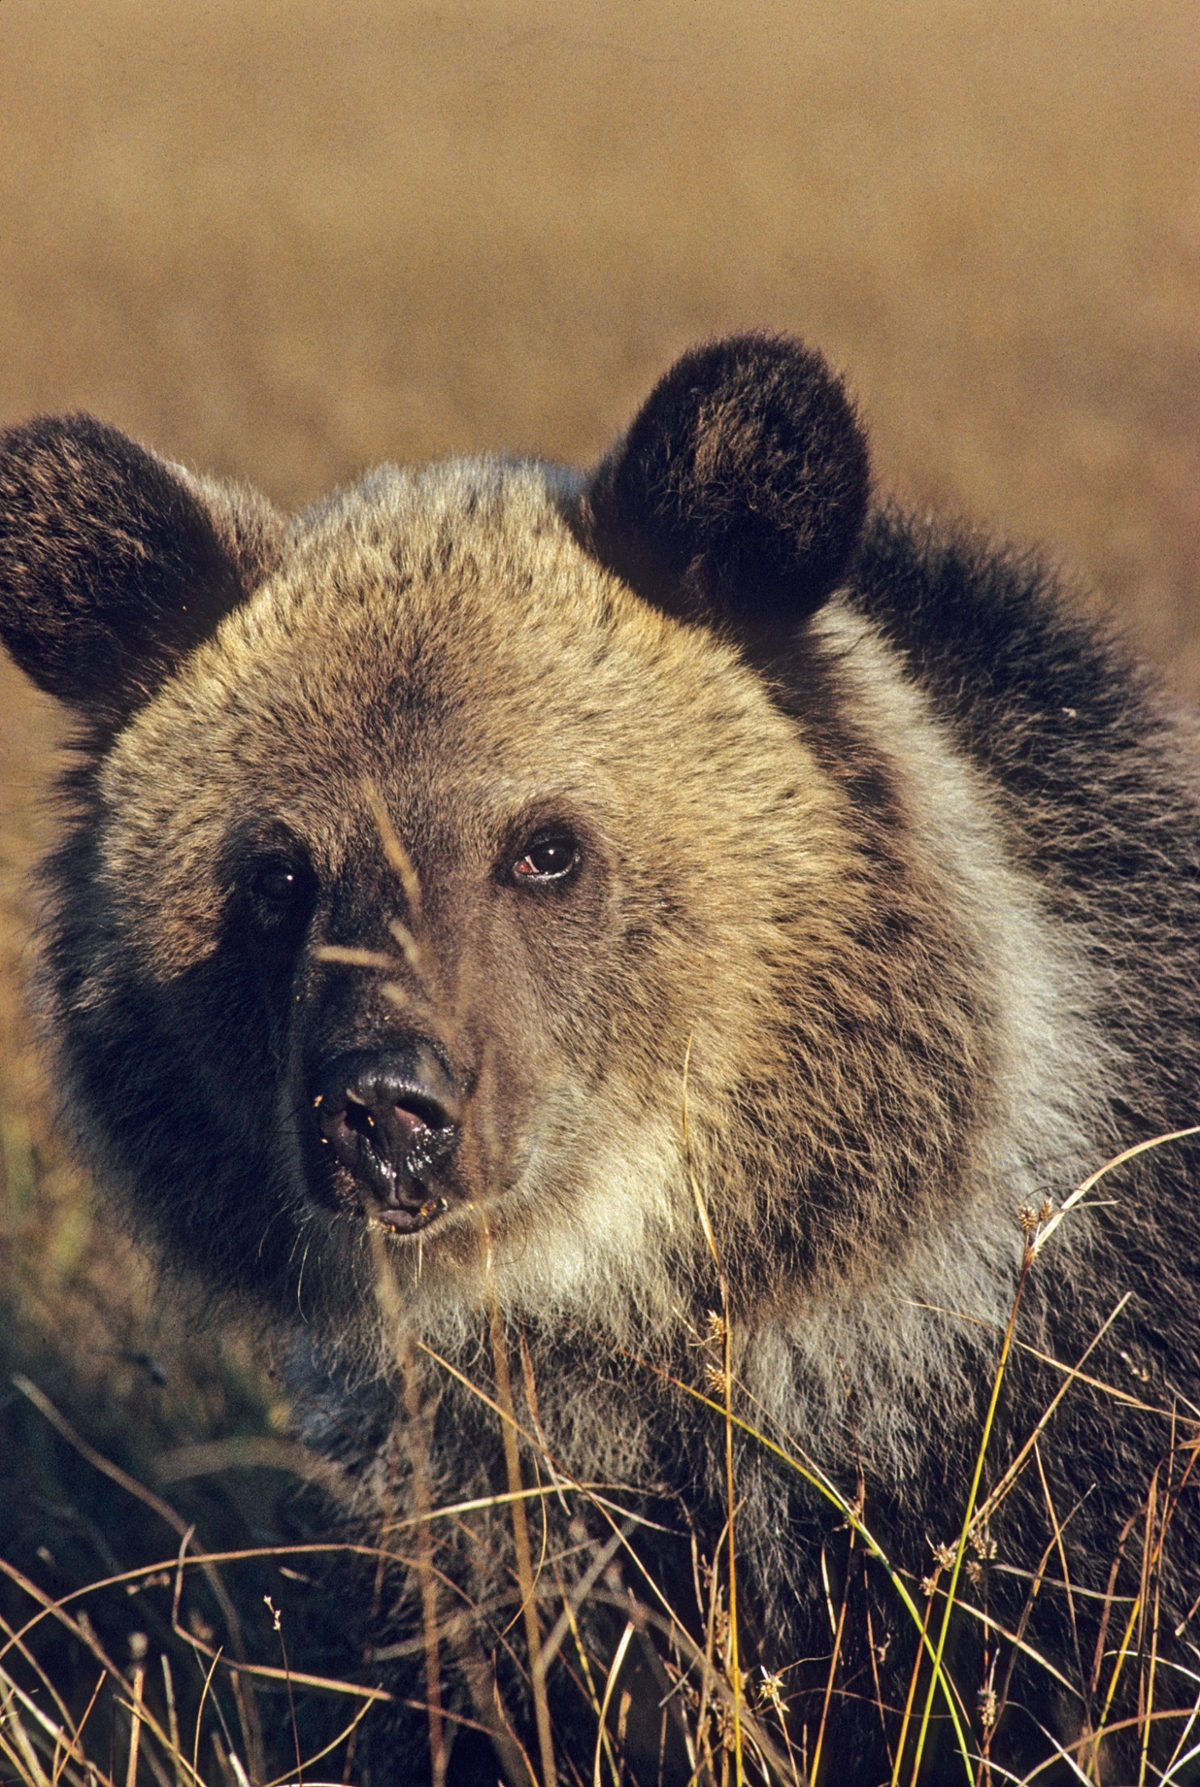 Adult grizzly bear with the distinctively “dished” face and round ears 